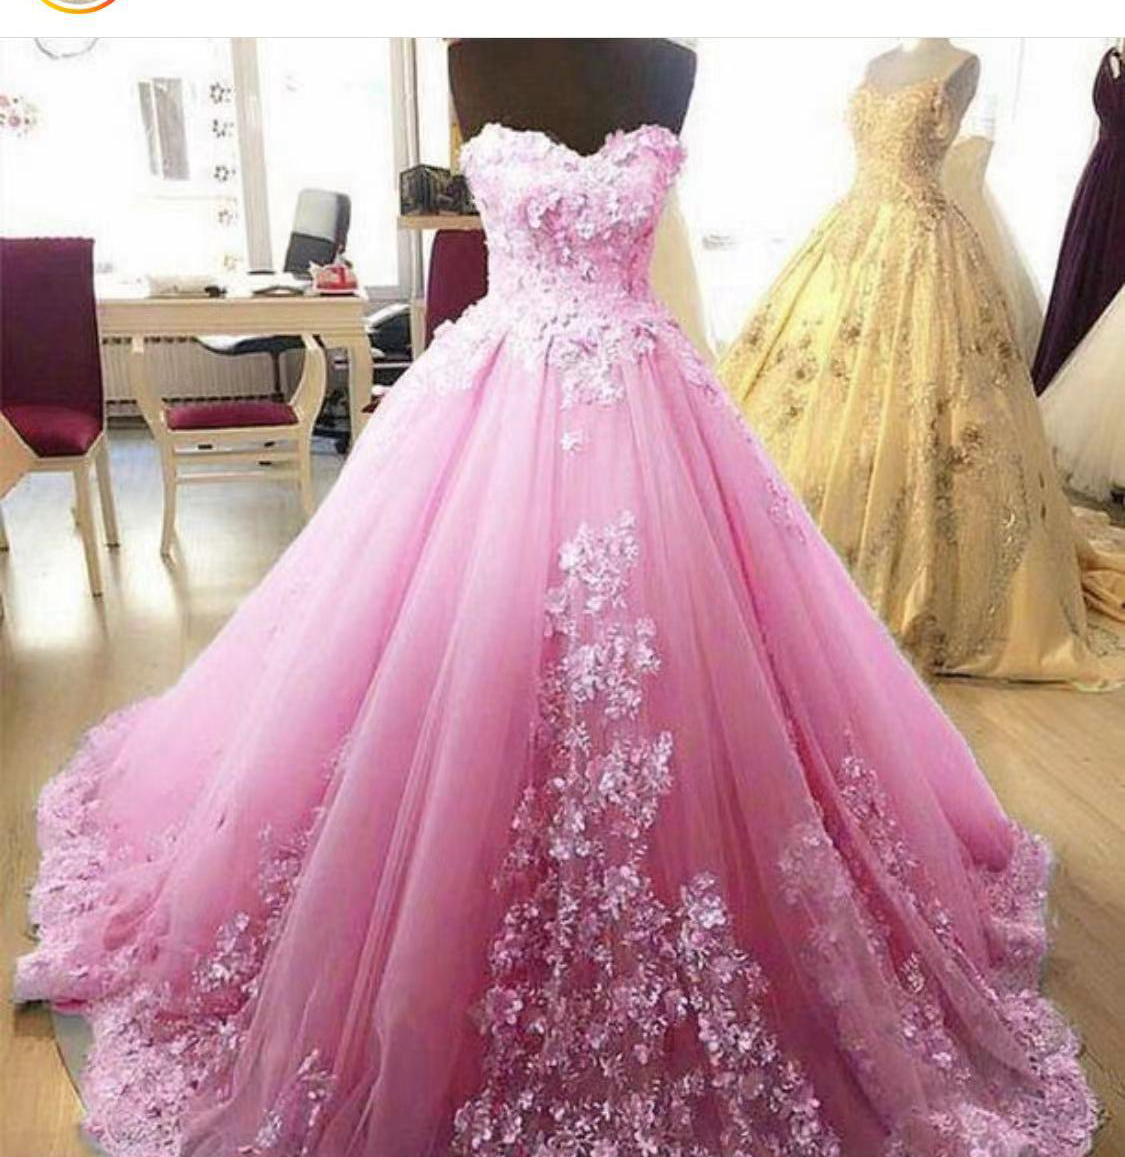 Pink Prom Dresses, Flowers Prom Dresses, Tulle Prom Dresses, Ball Gown Prom Dresses, 3d Flowers Prom Dresses, Pink Evening Dresses, Tulle Prom